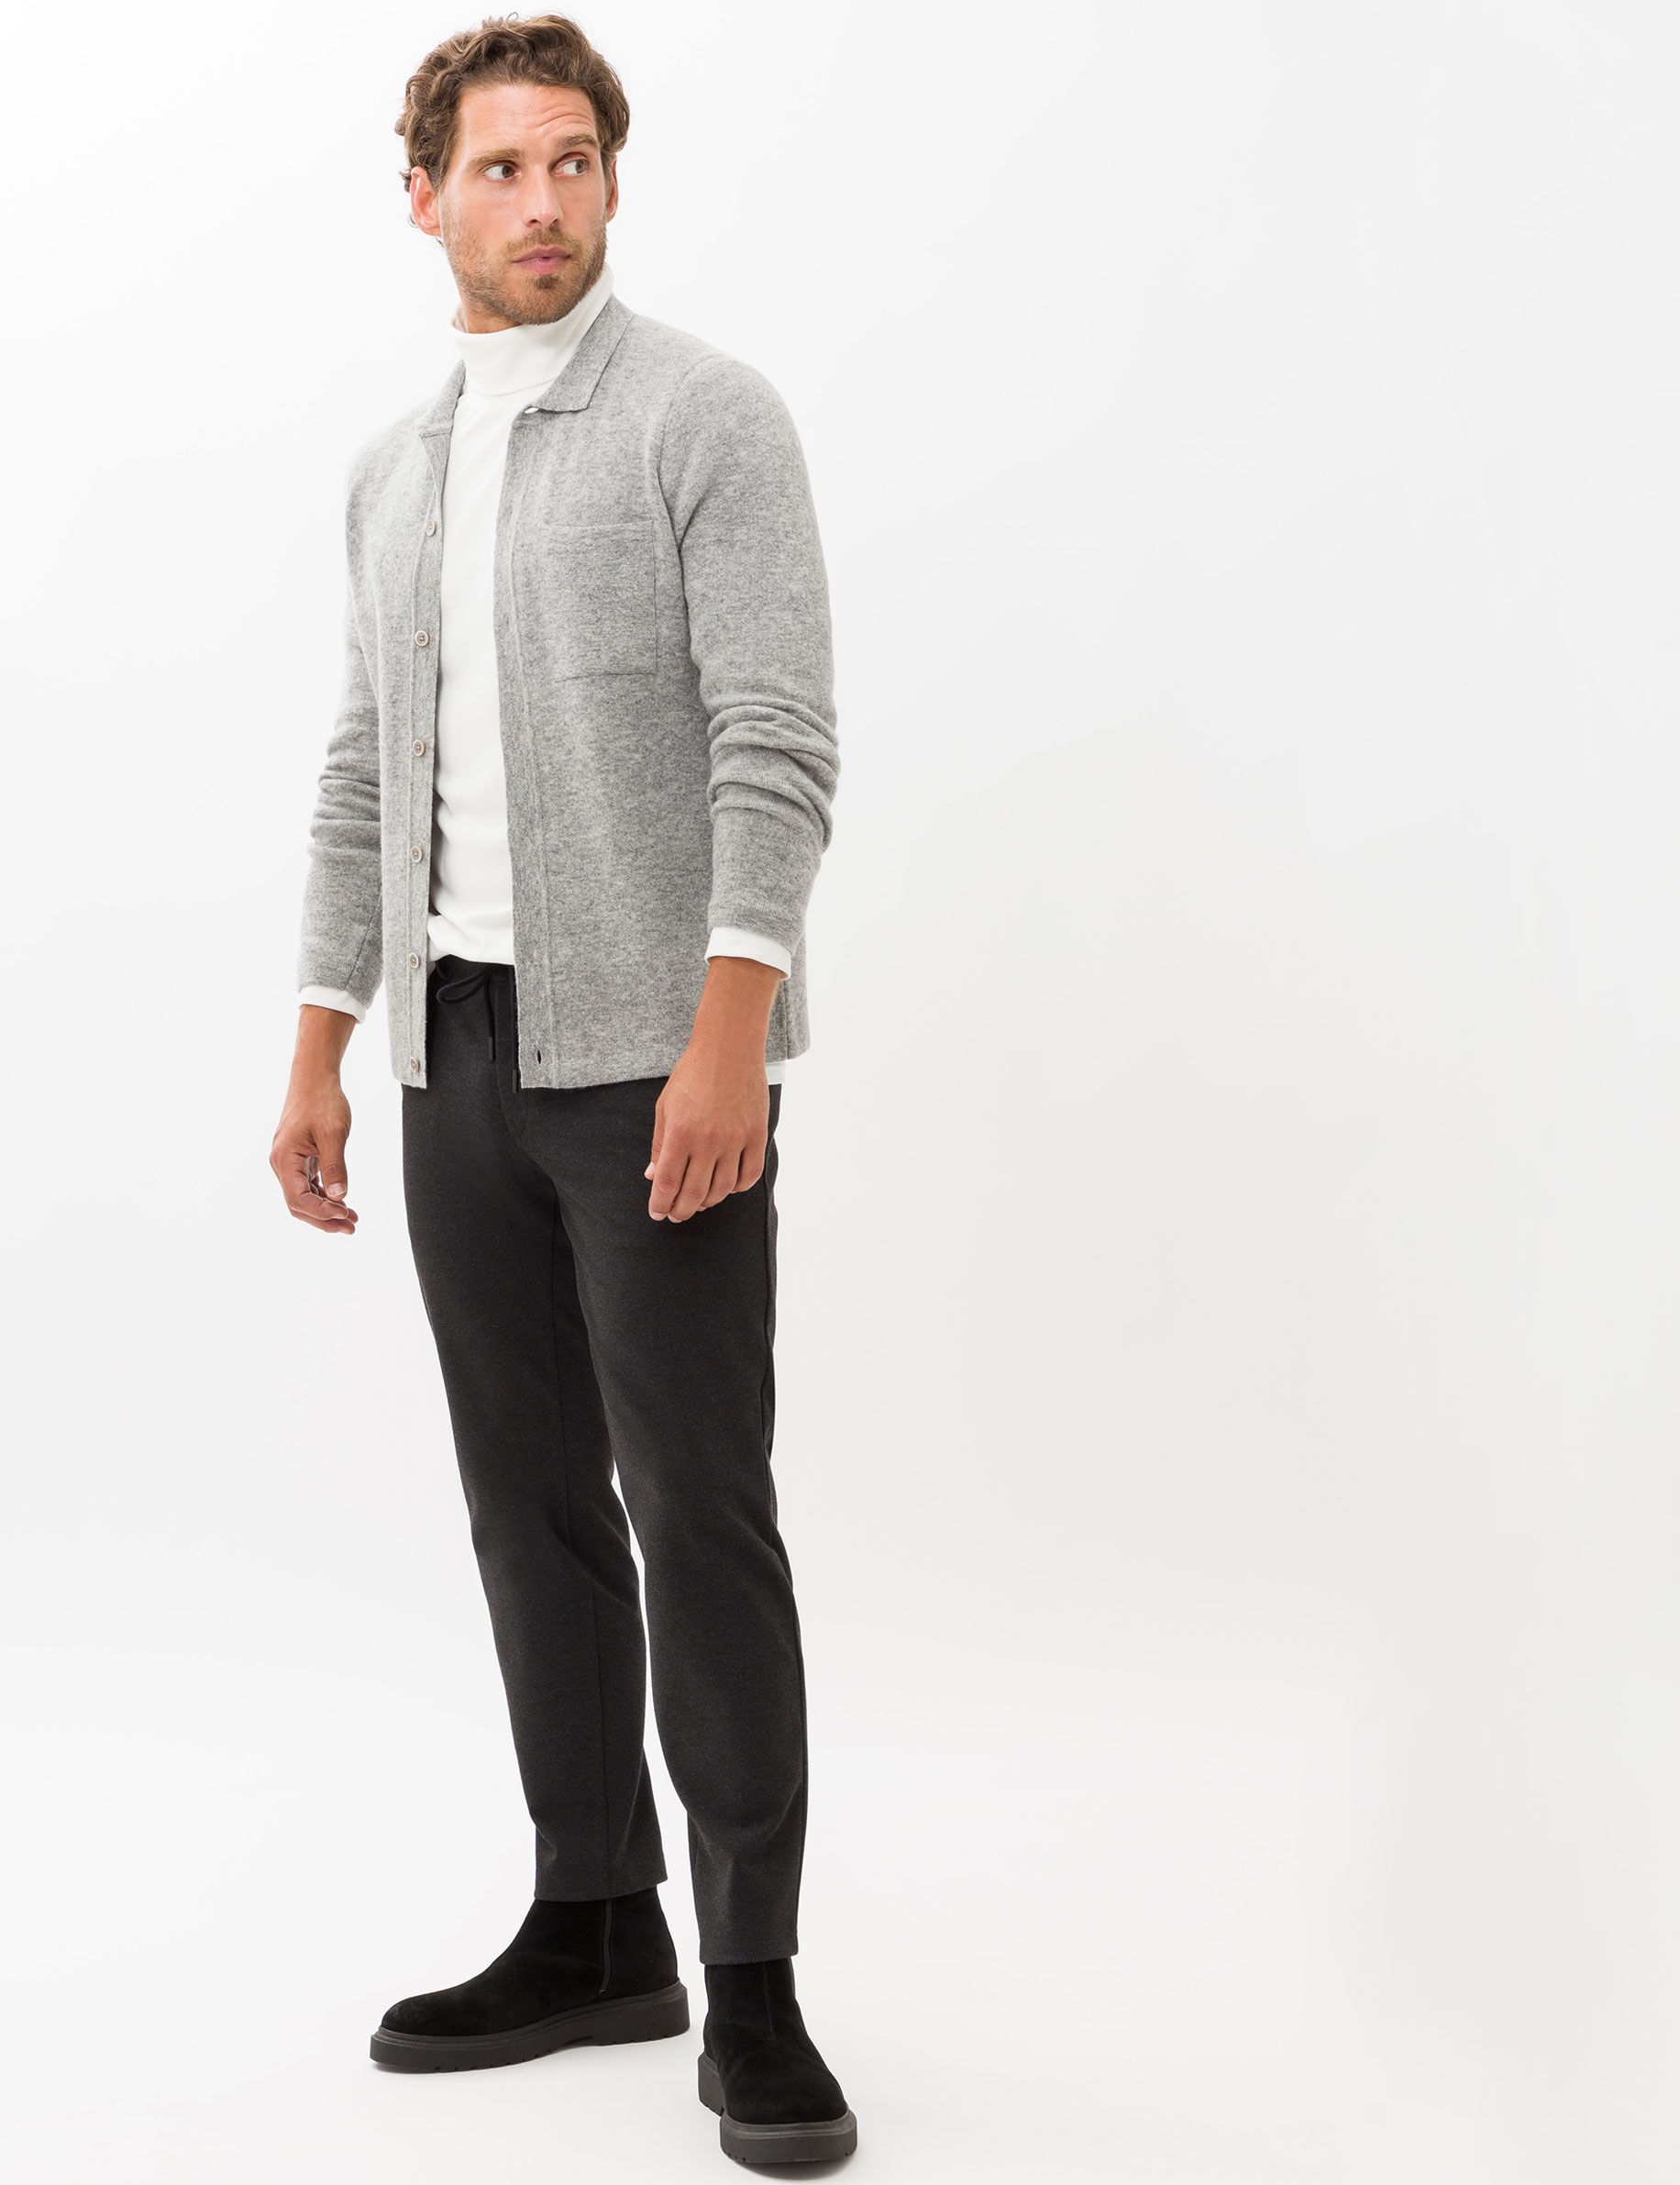 Men Style PHIL CEMENT Modern Fit Model Outfit